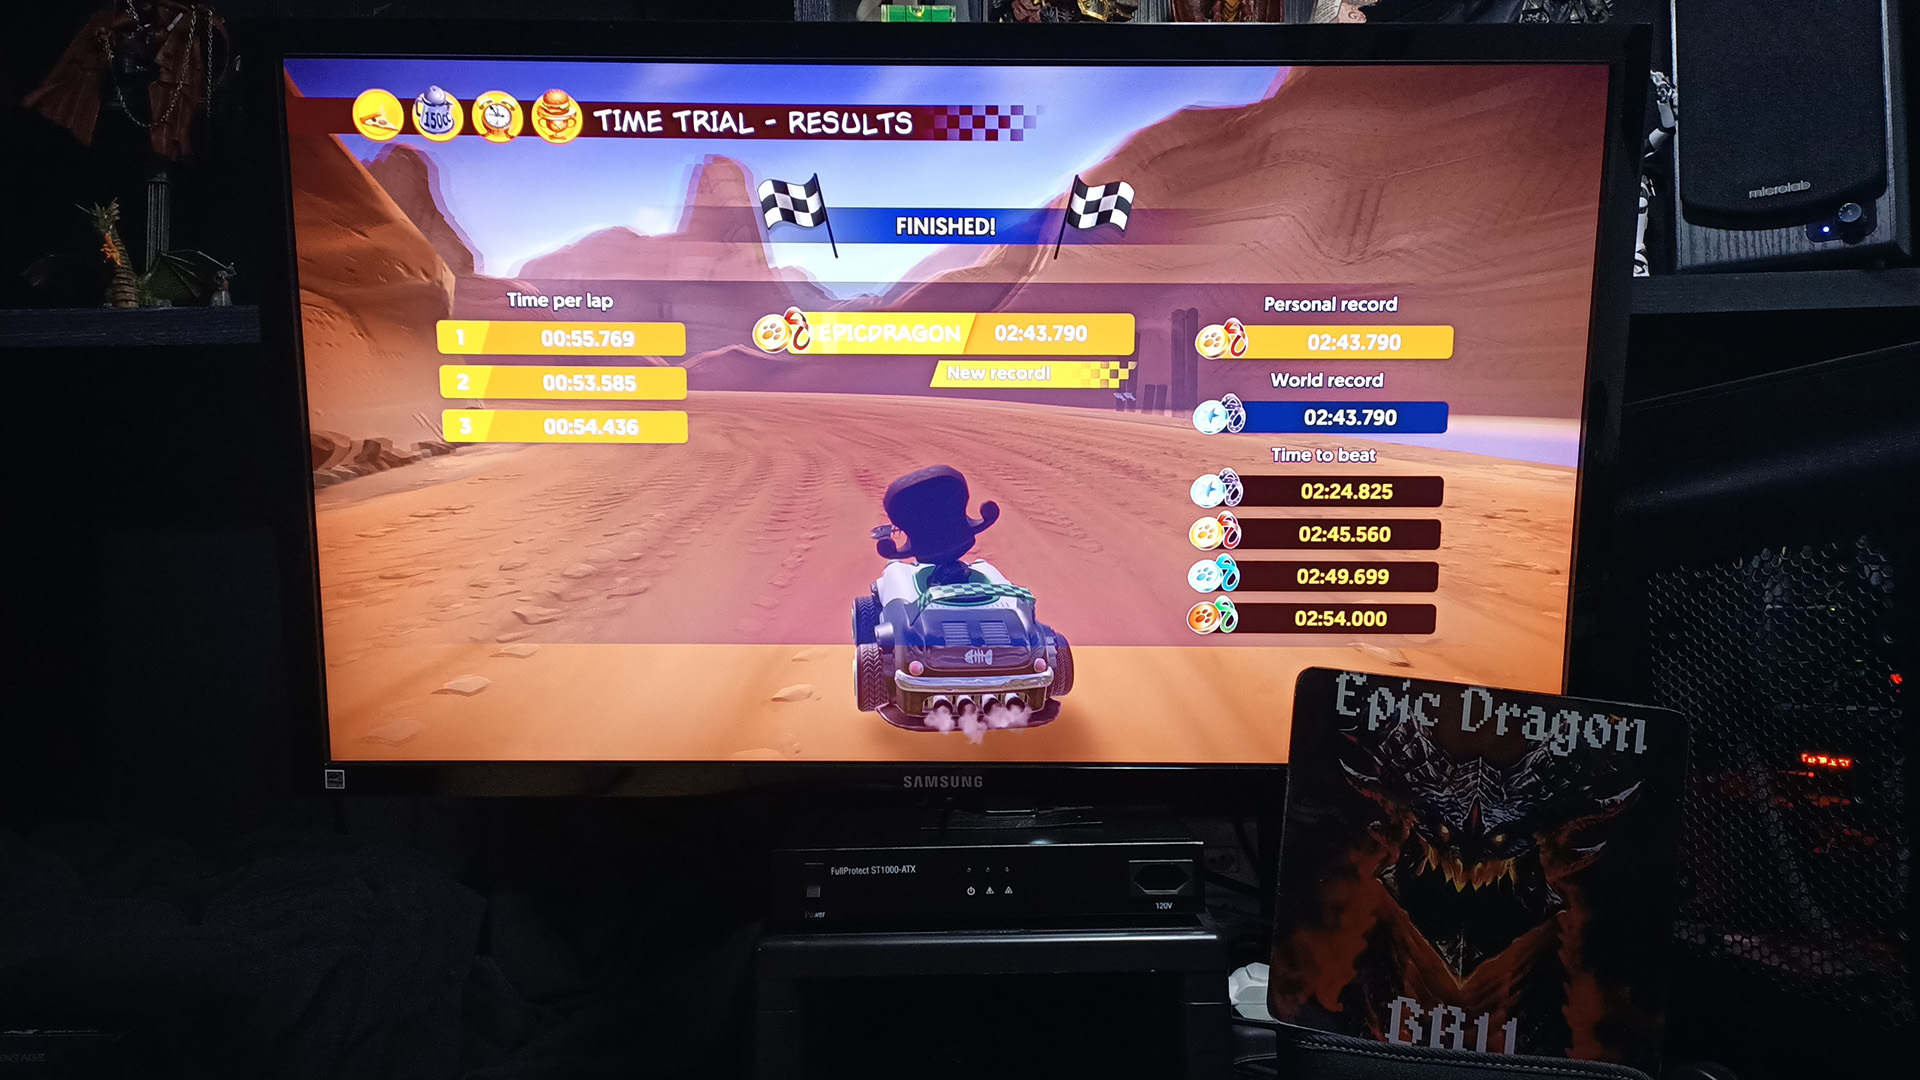 Garfield Kart Furious Racing: Blazing Oasis [Time Trial: 3 Laps] time of 0:02:43.79